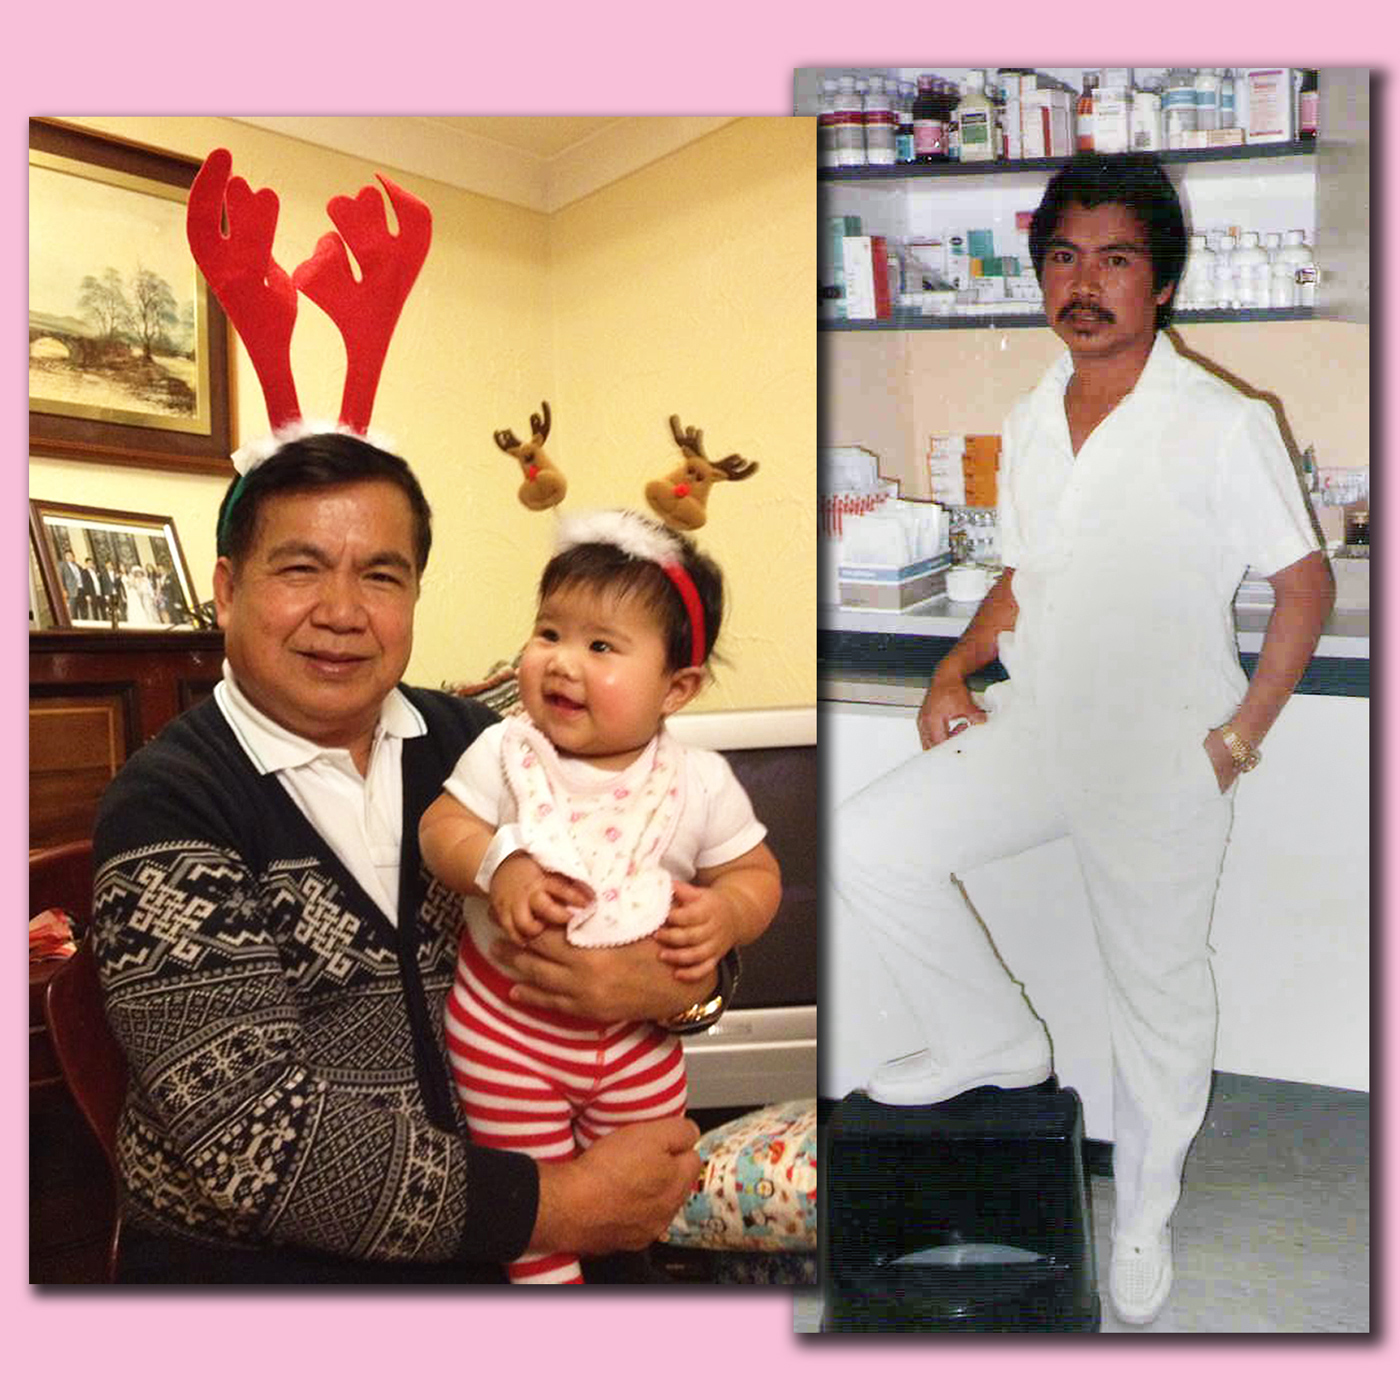 Policarpio with his granddaughter and as a younger man